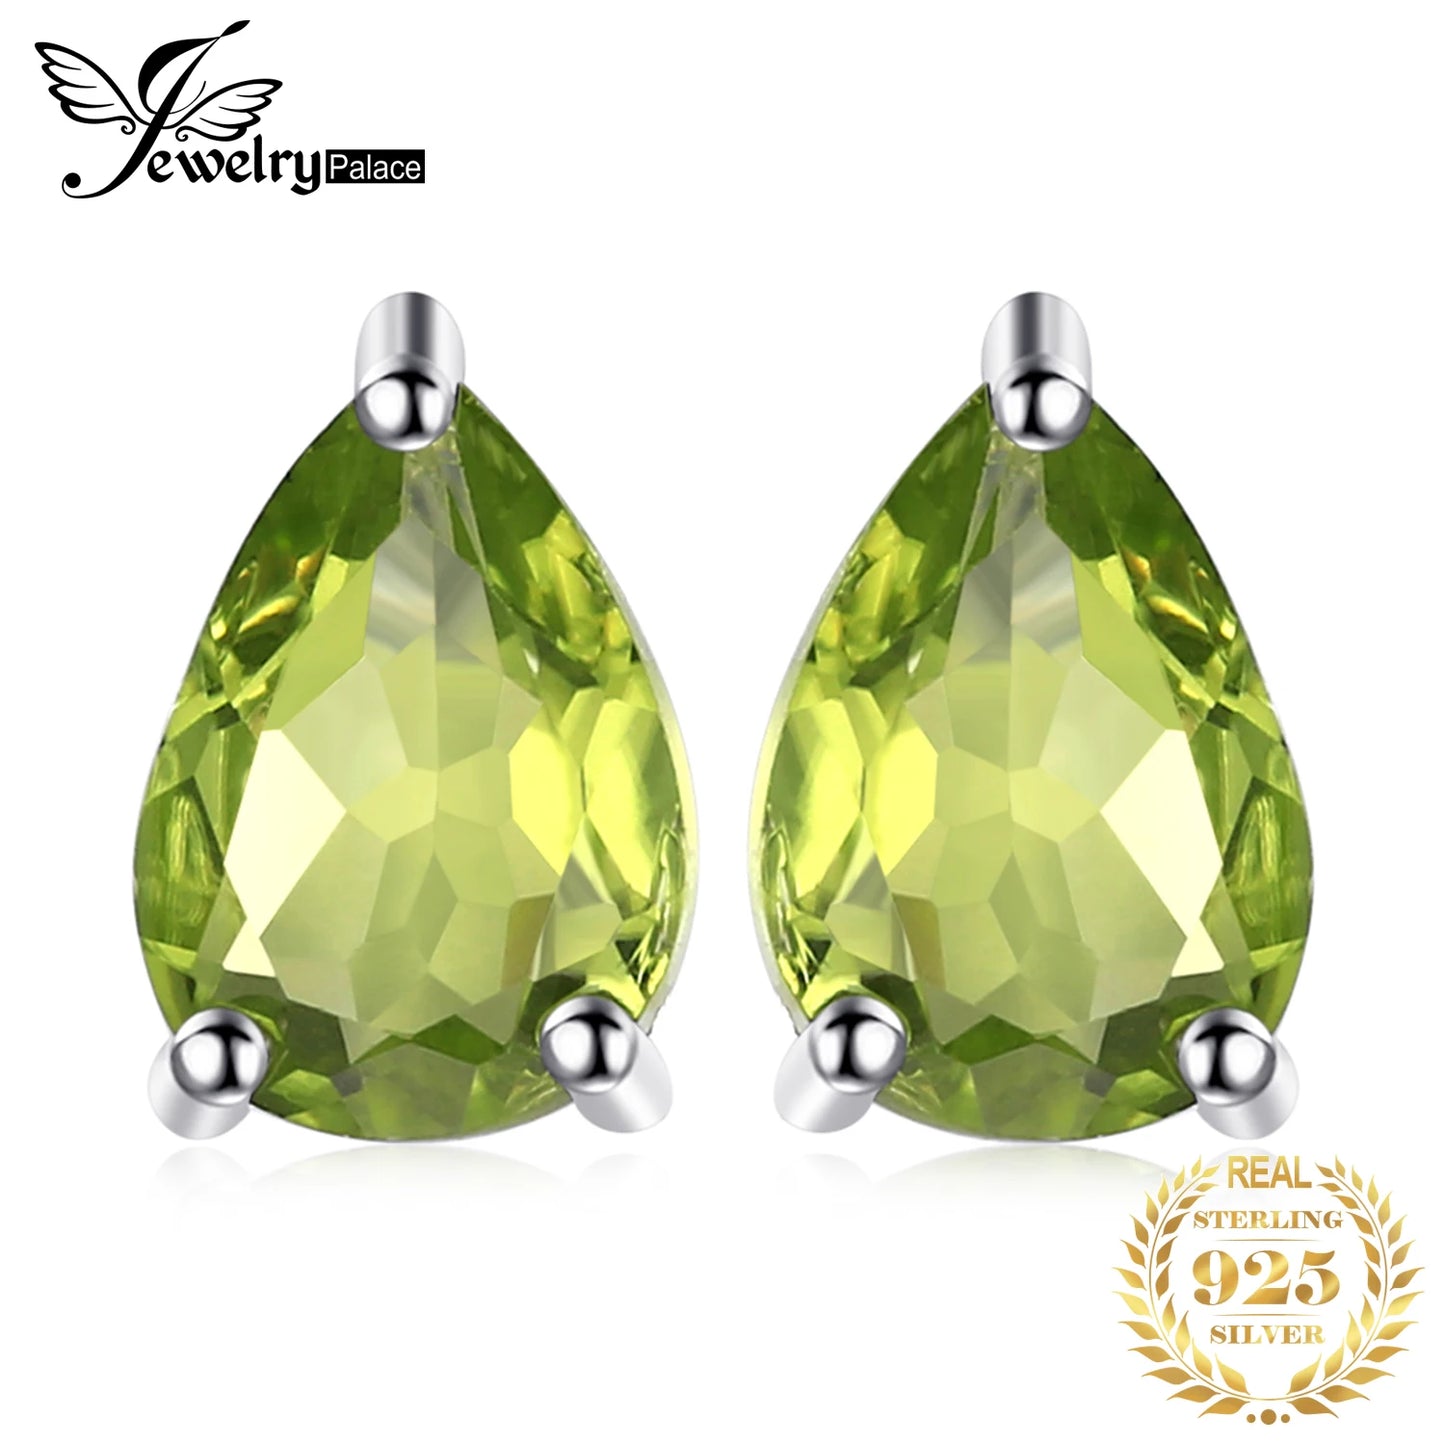 JewelryPalace 1.5ct Pear Genuine Peridot 925 Sterling Silver Stud Earrings for Women Fashion Green Gemstone Statement Jewelry CHINA